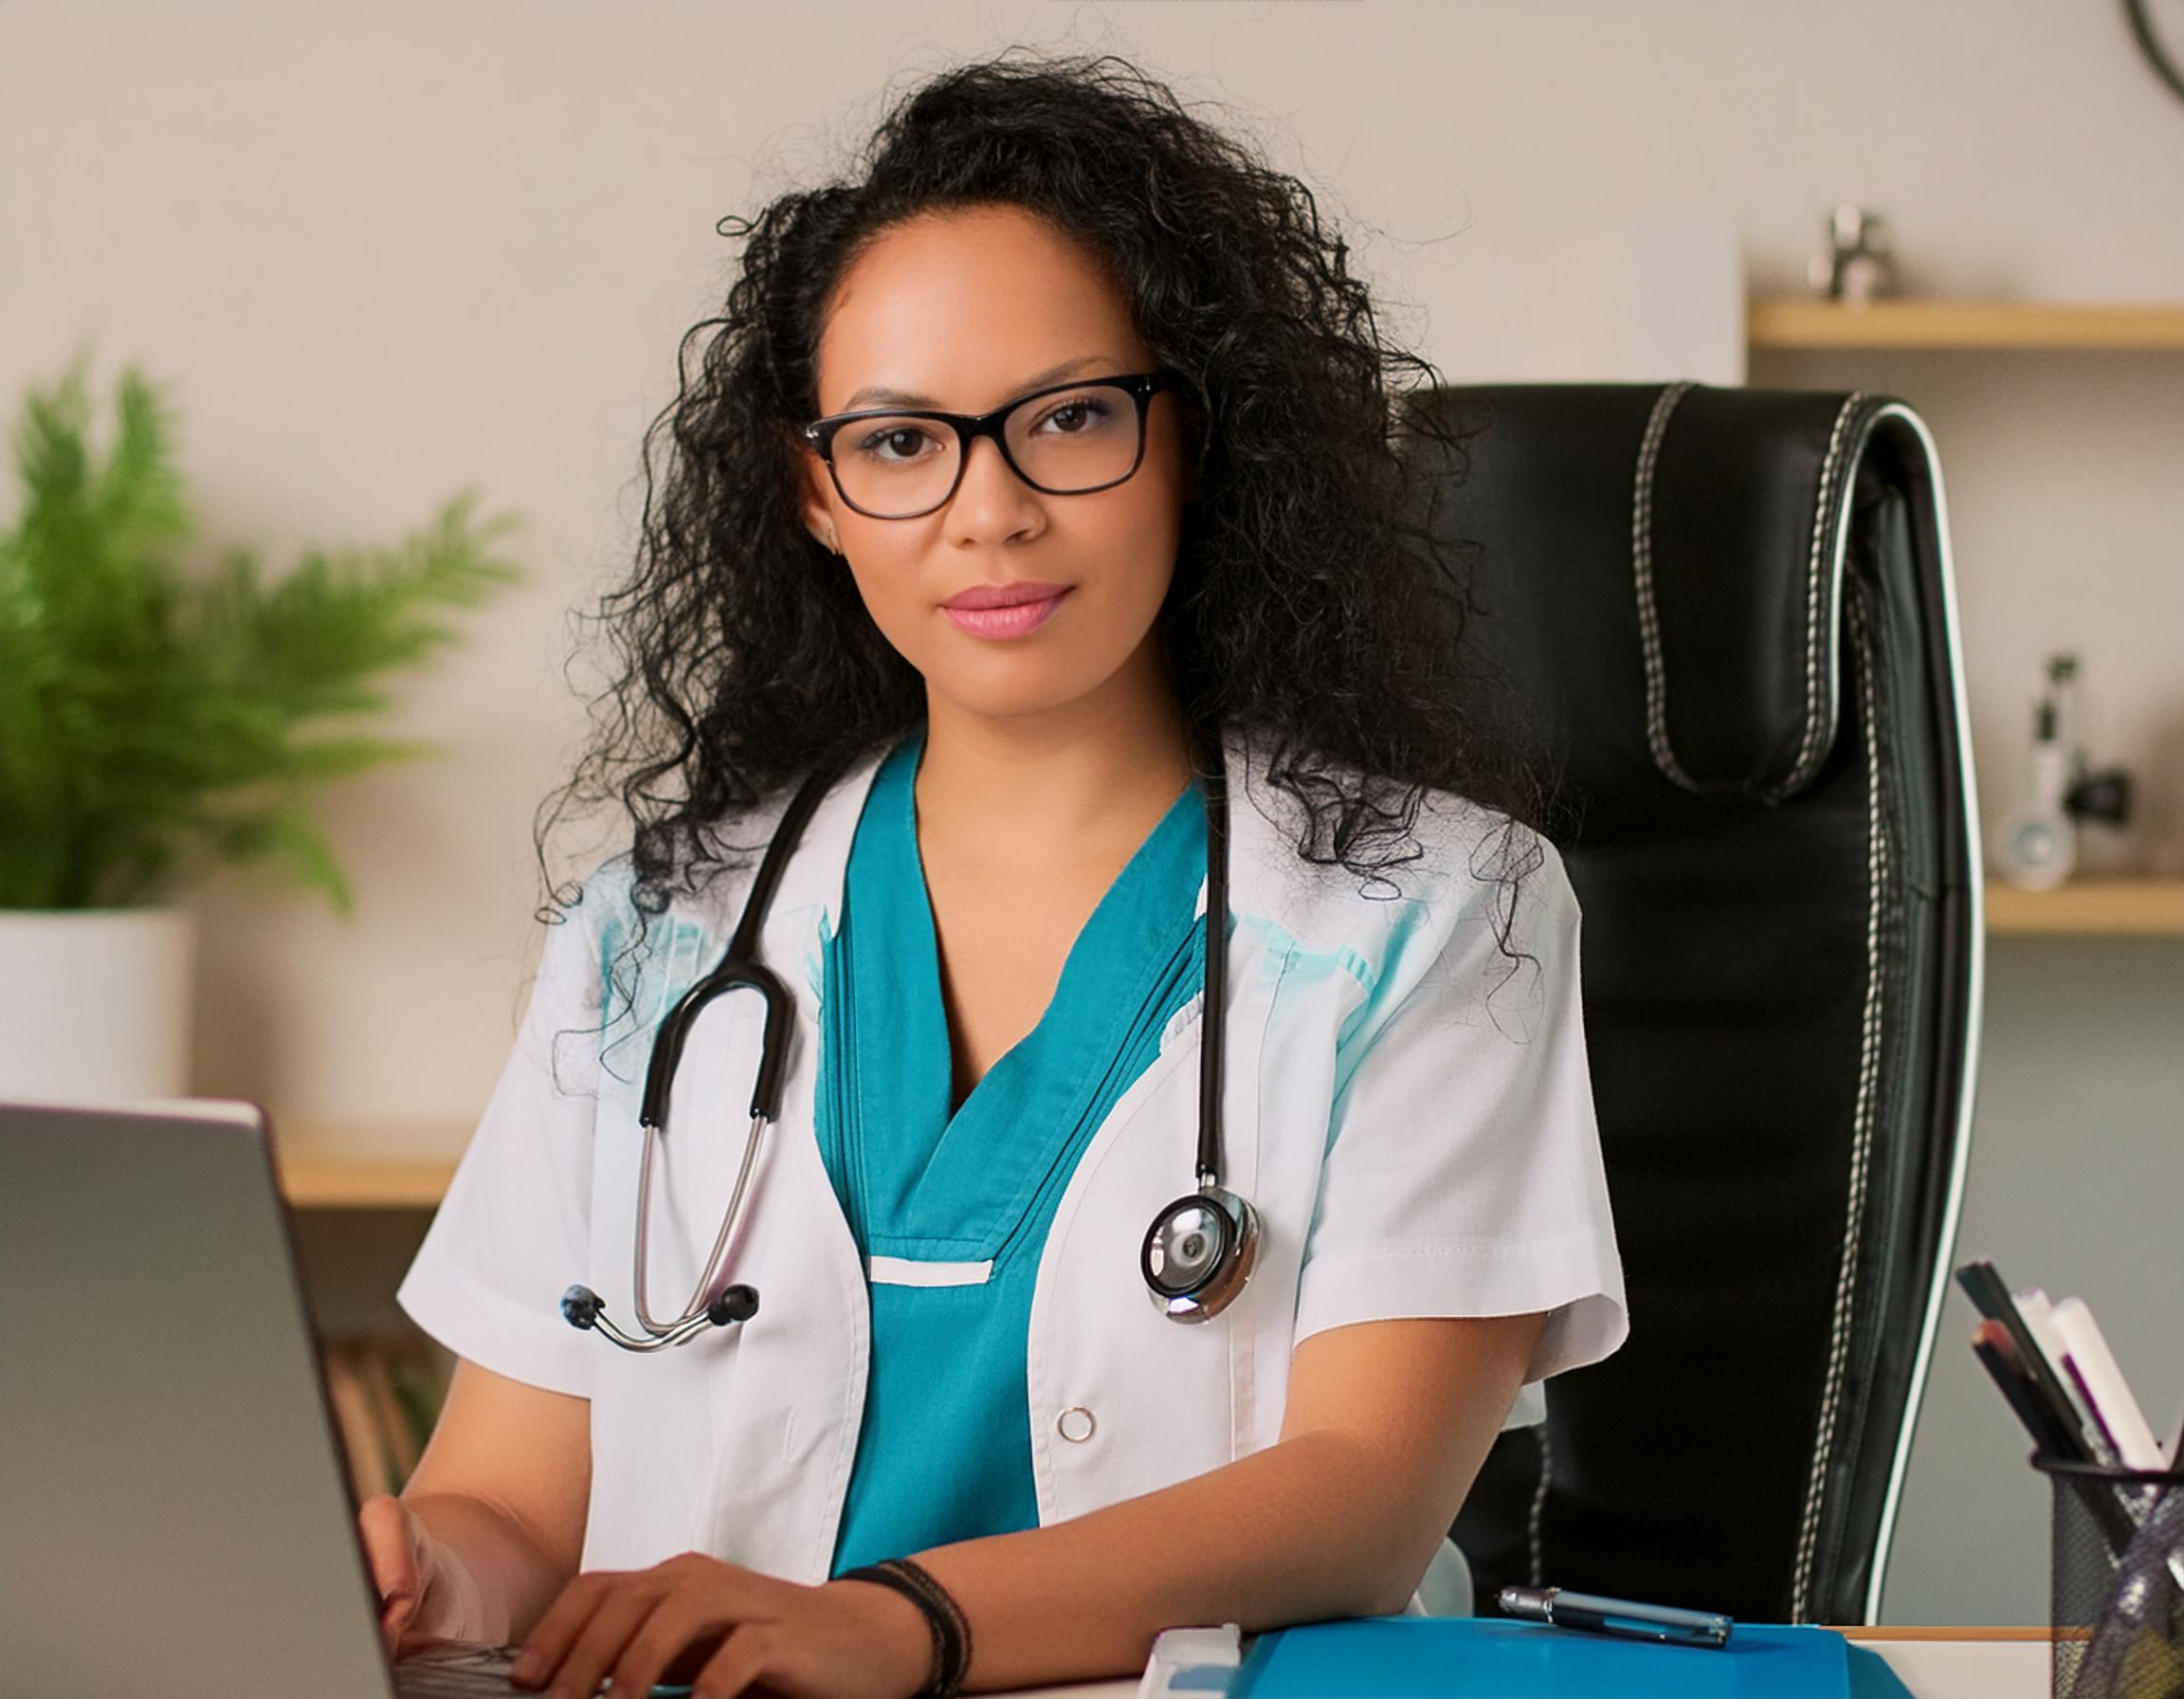 Explore Virtual Medical Assistants' role in the telehealth revolution. Kickstart your career journey with NCC today.